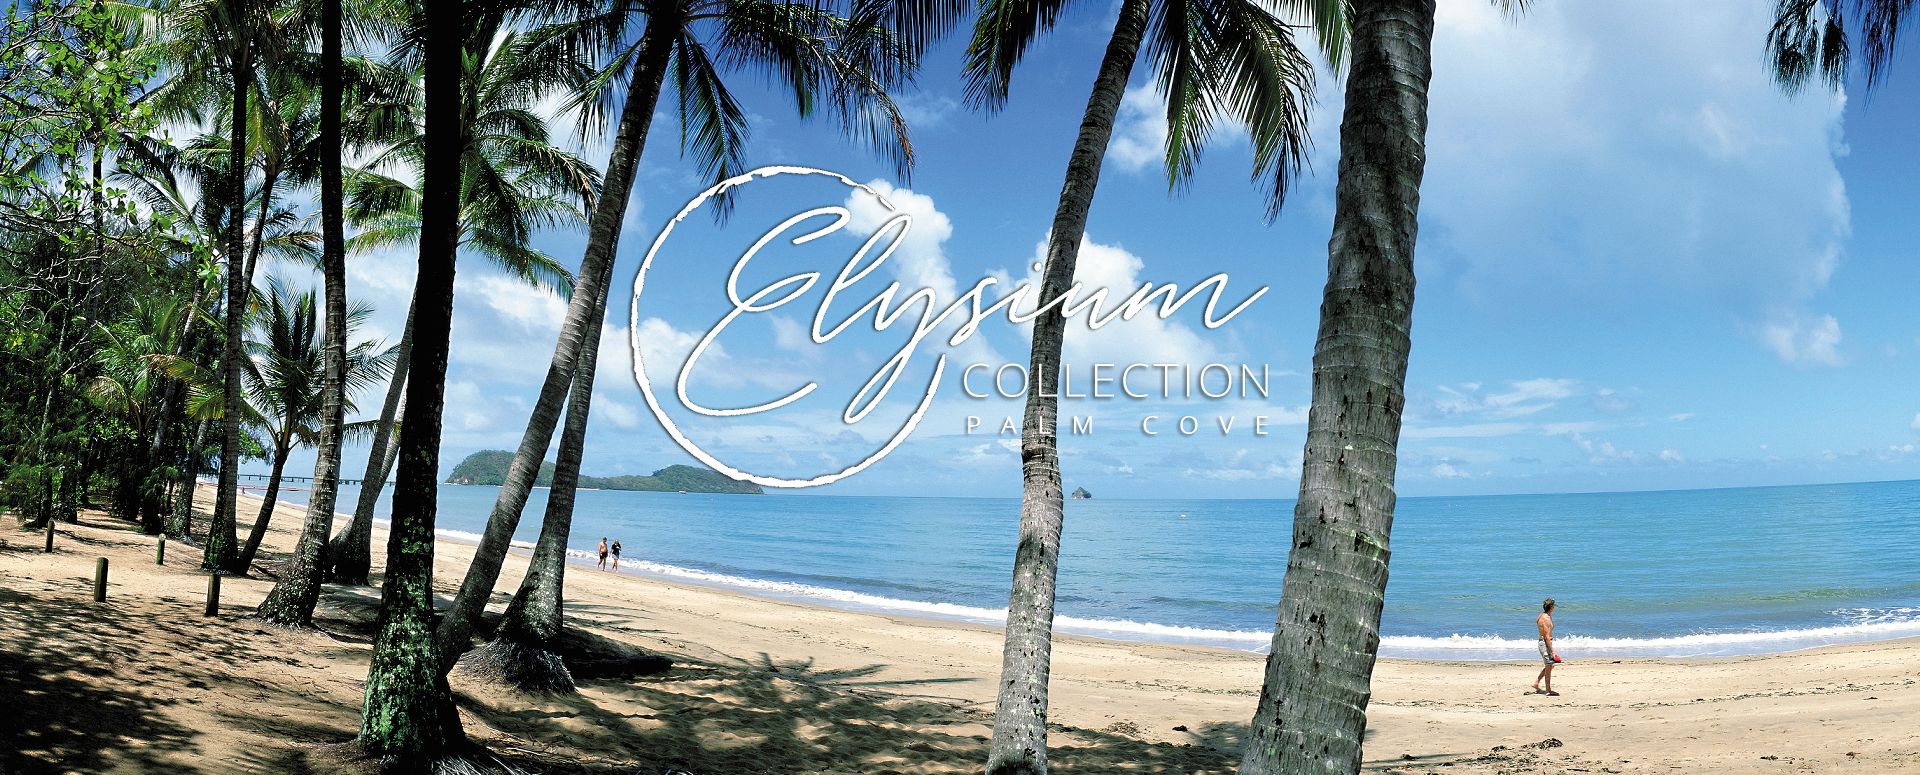 Palm Cove Cairns Holiday Apartments Elysium Collection